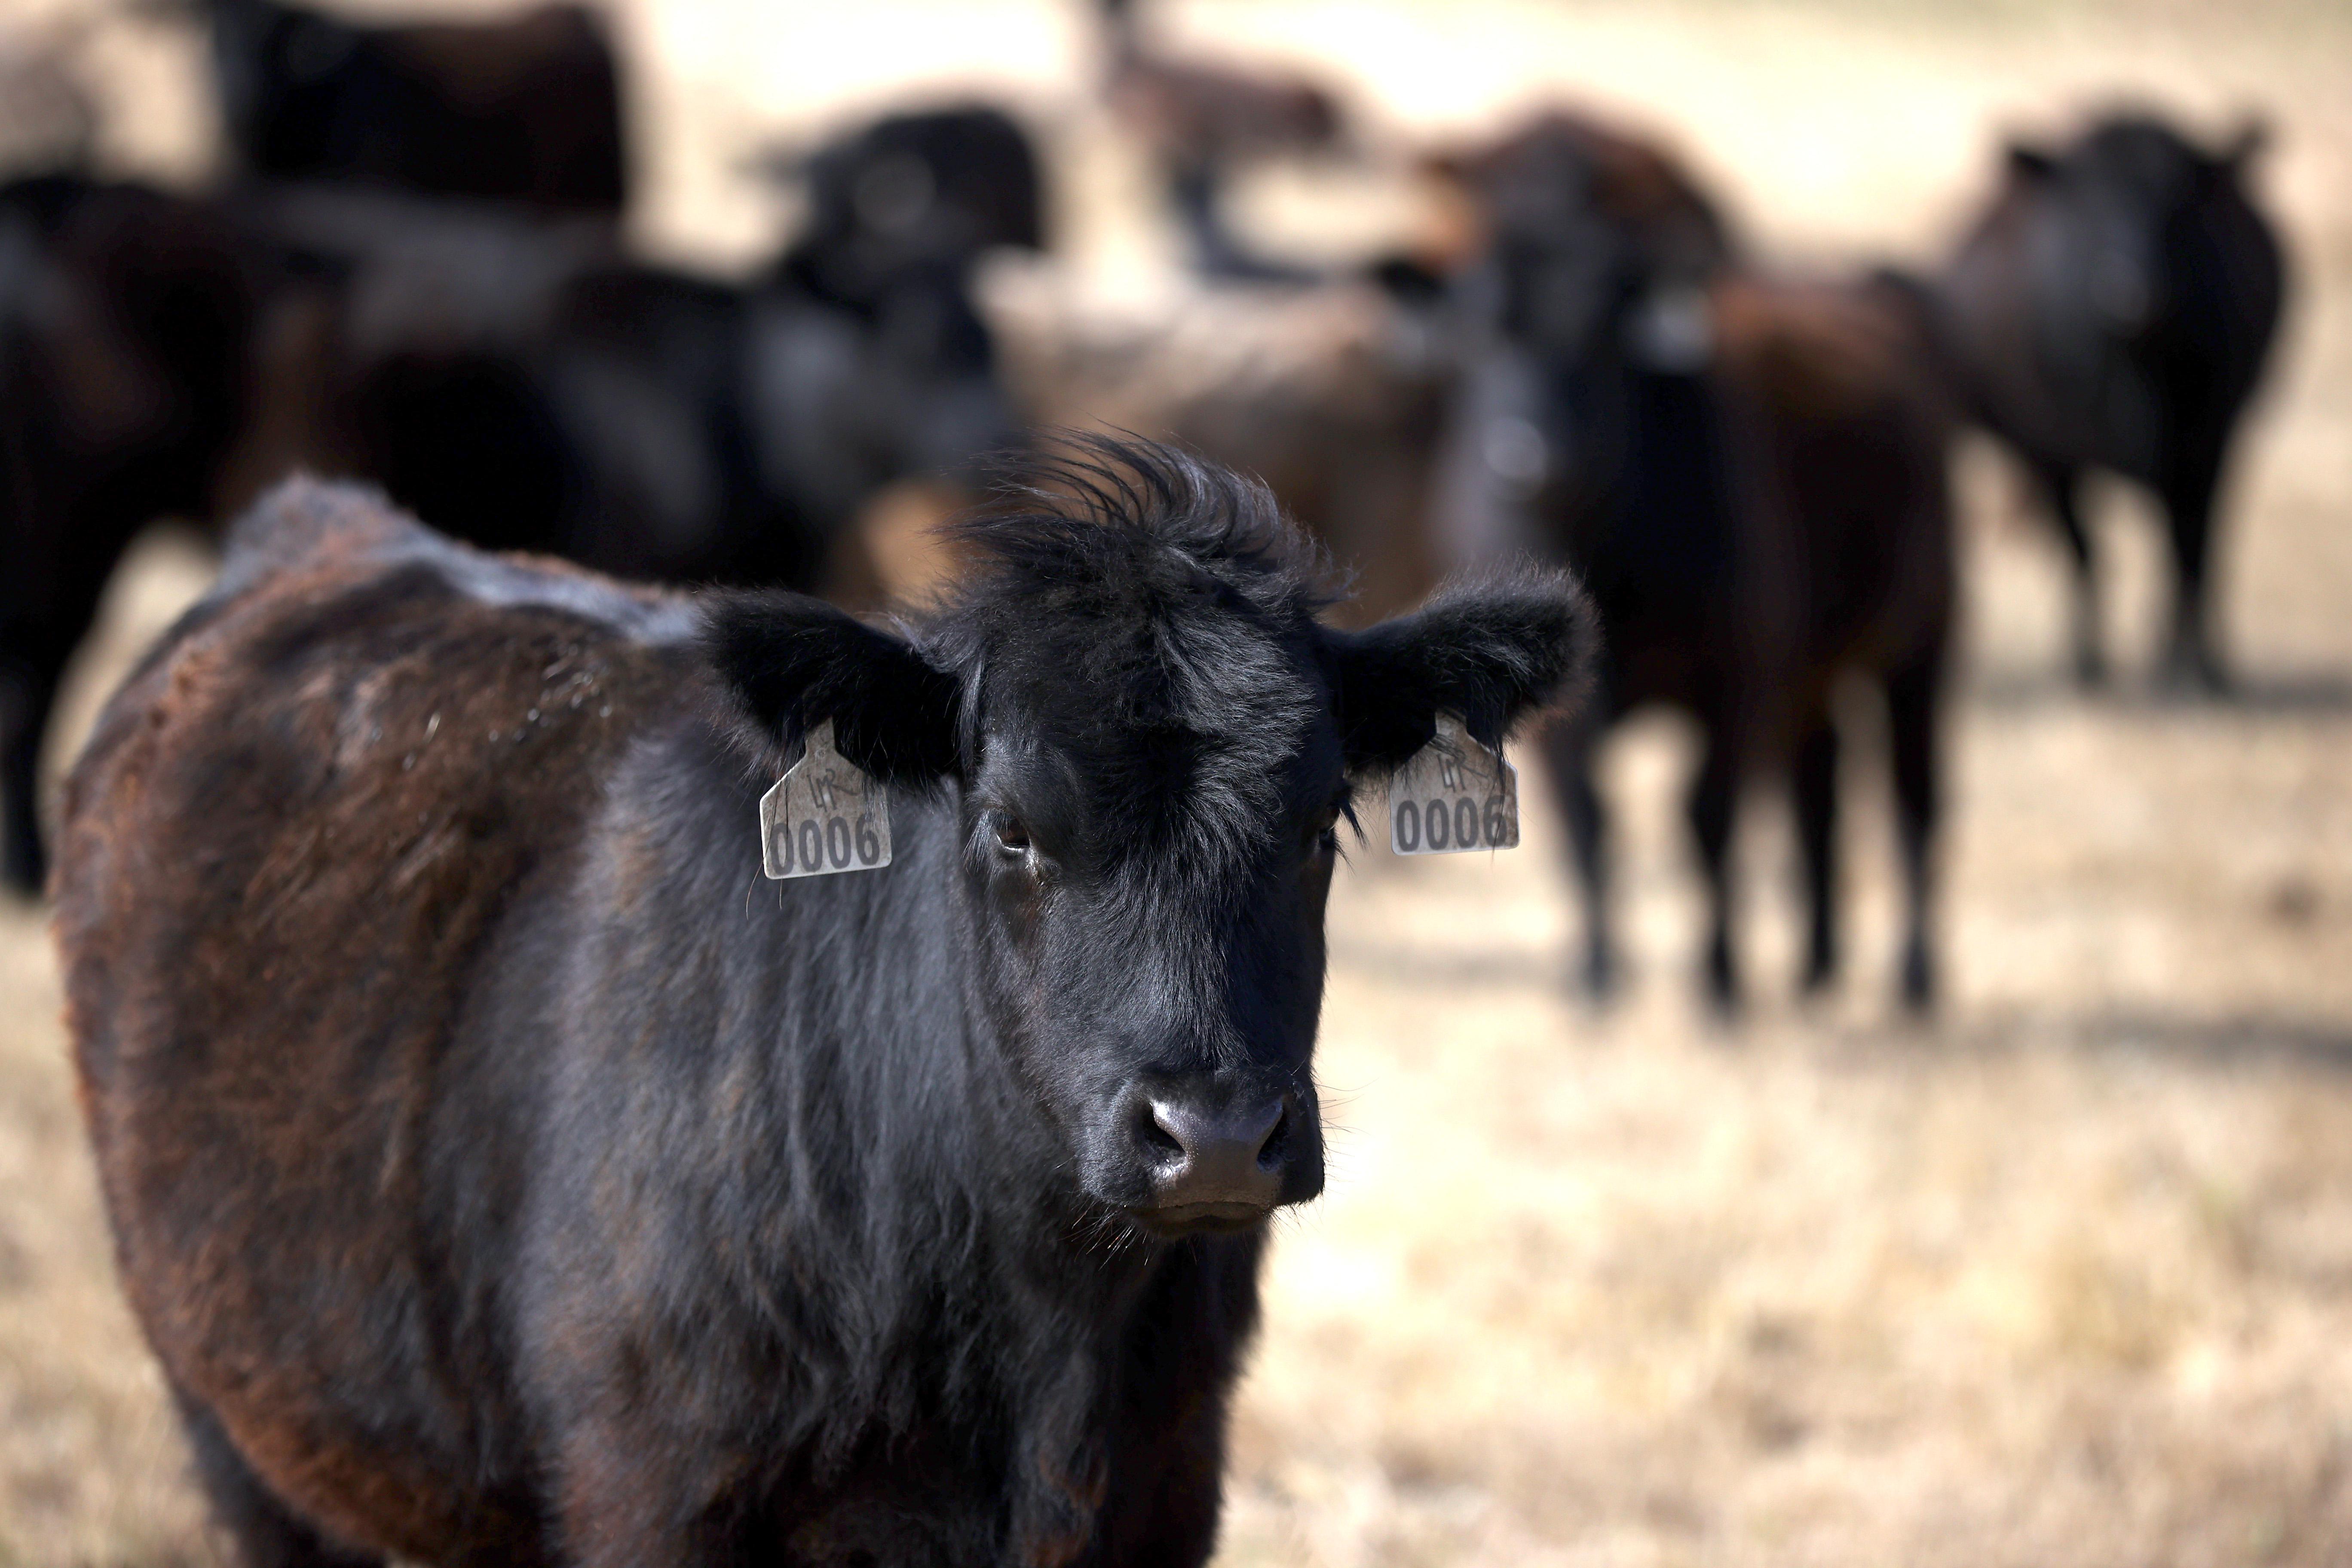 A cow in the foreground looks at the camera while others graze on brown grass behind it.